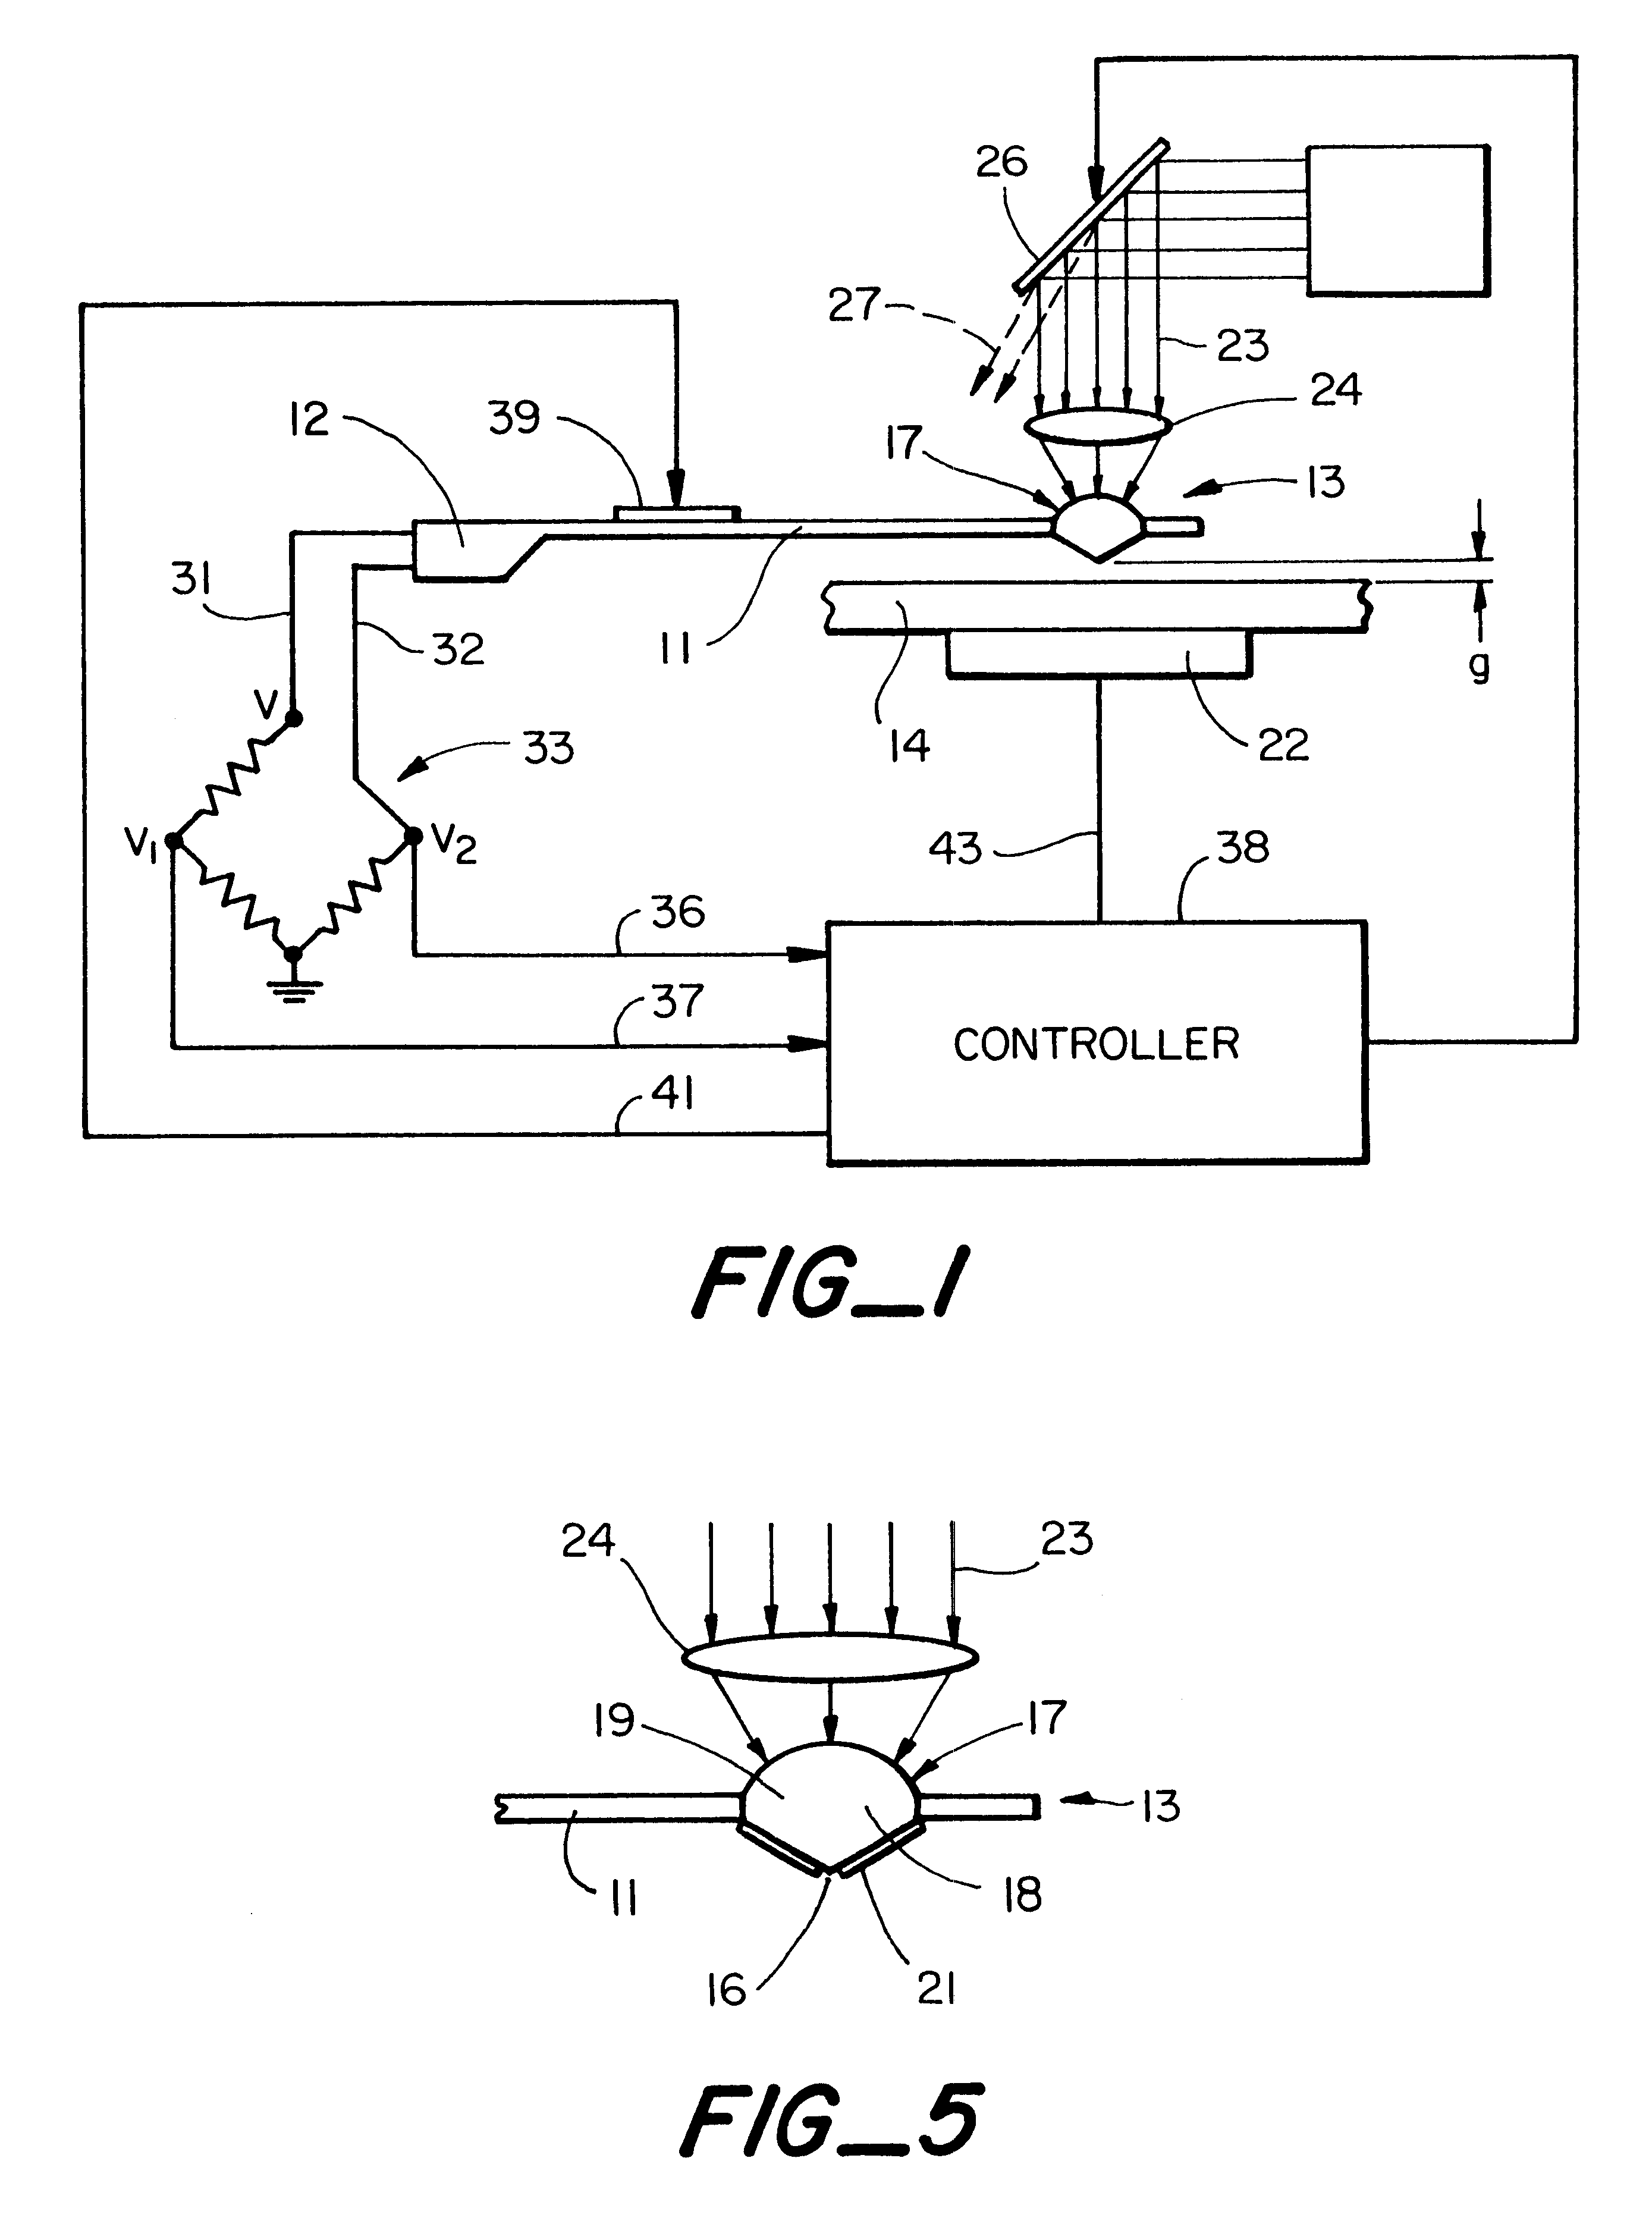 Near field optical scanning system employing microfabricated solid immersion lens